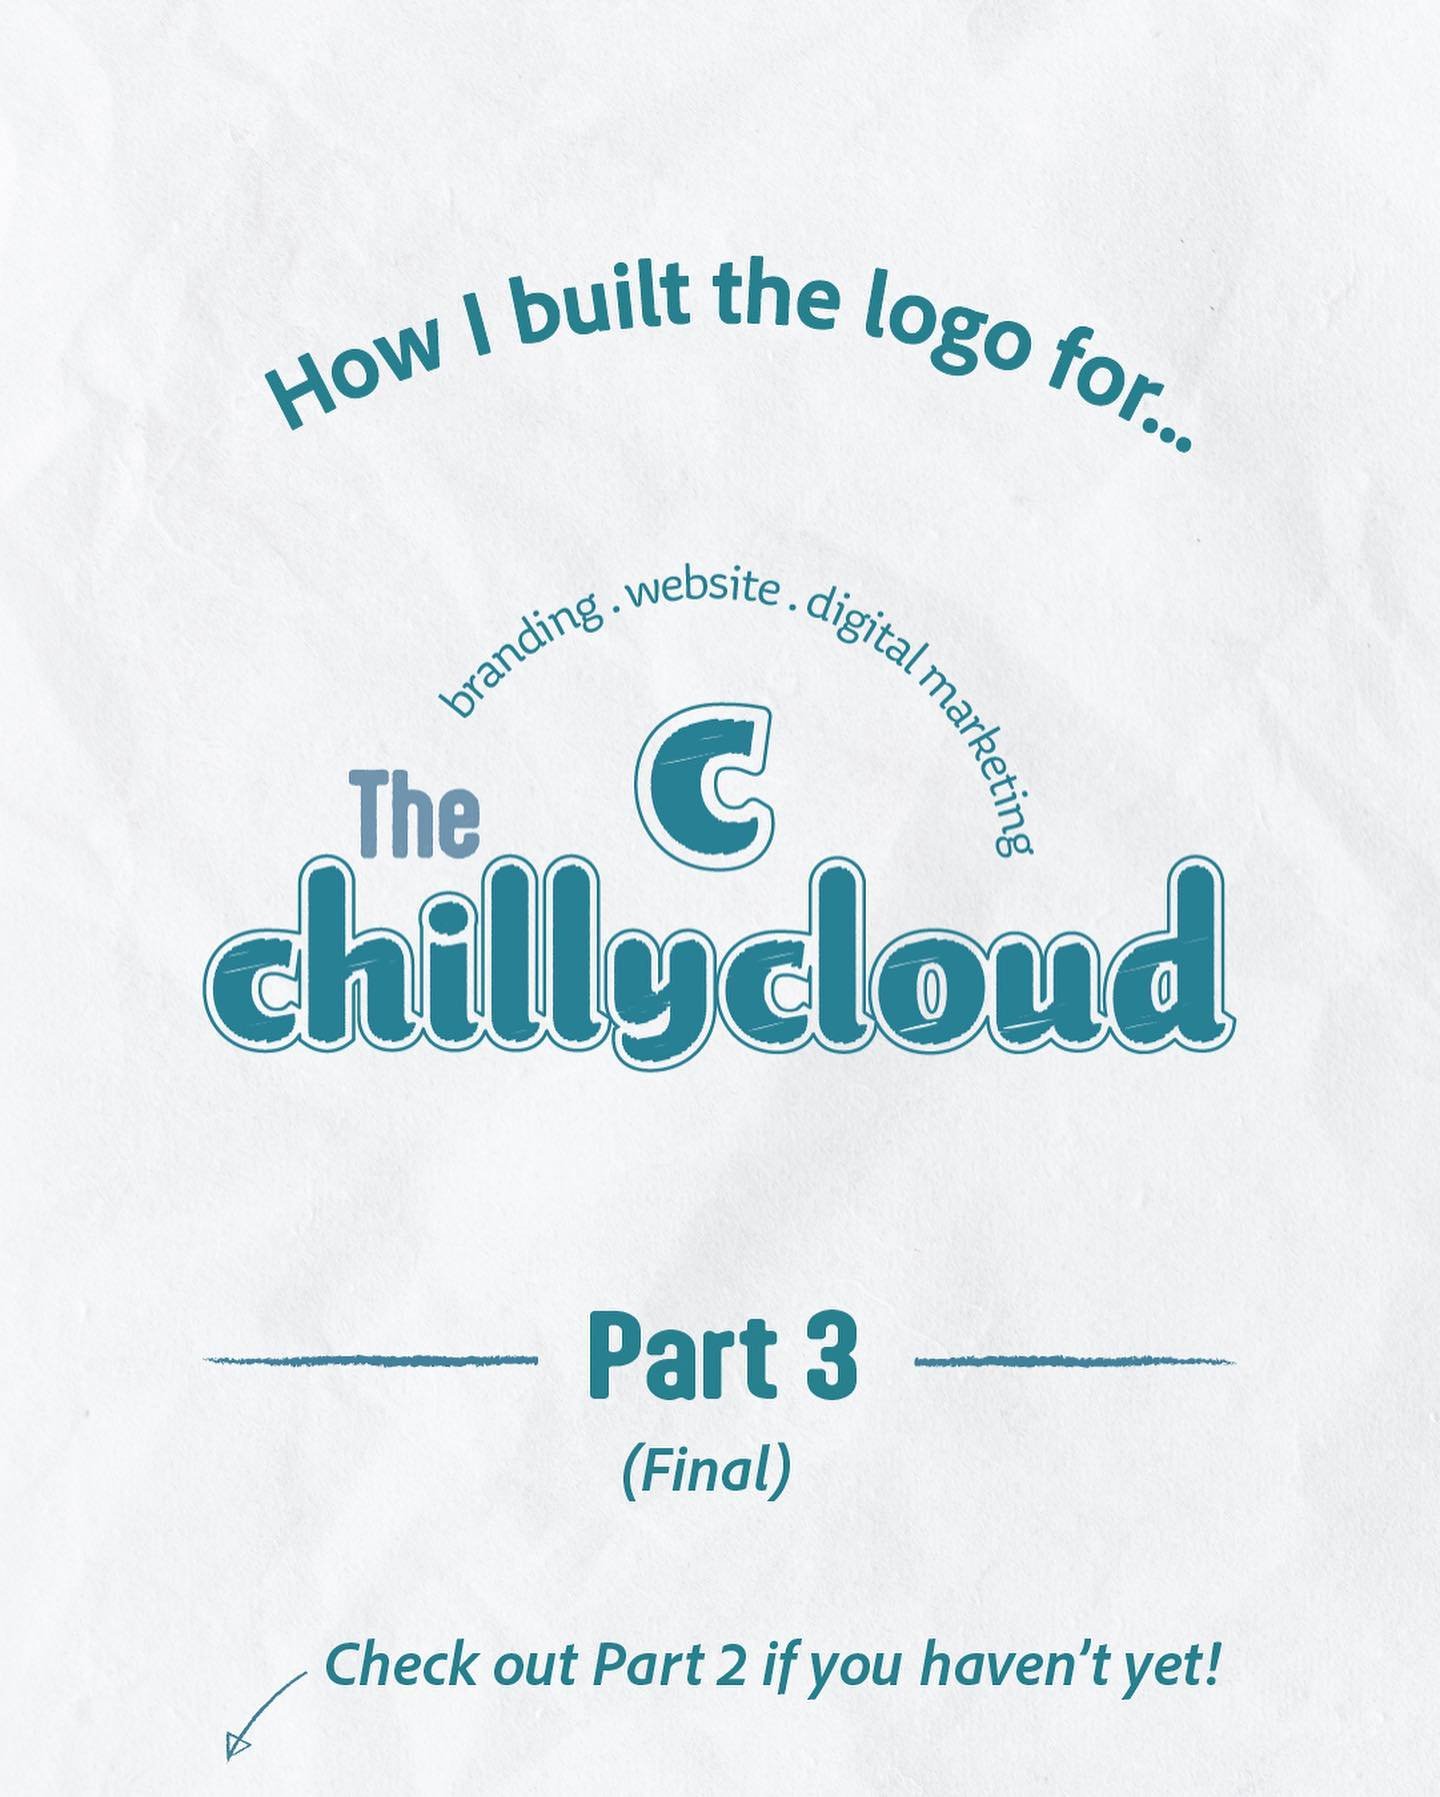 ☁️Happy 4th of July! 🇺🇸

It&rsquo;s finally a wrap of the series &mdash; Part 3 of how I built the logo for The Chilly Cloud. 
Thank you for following along till the end!⚡️
&mdash;
There were actually moments of doubt to share my design process bec